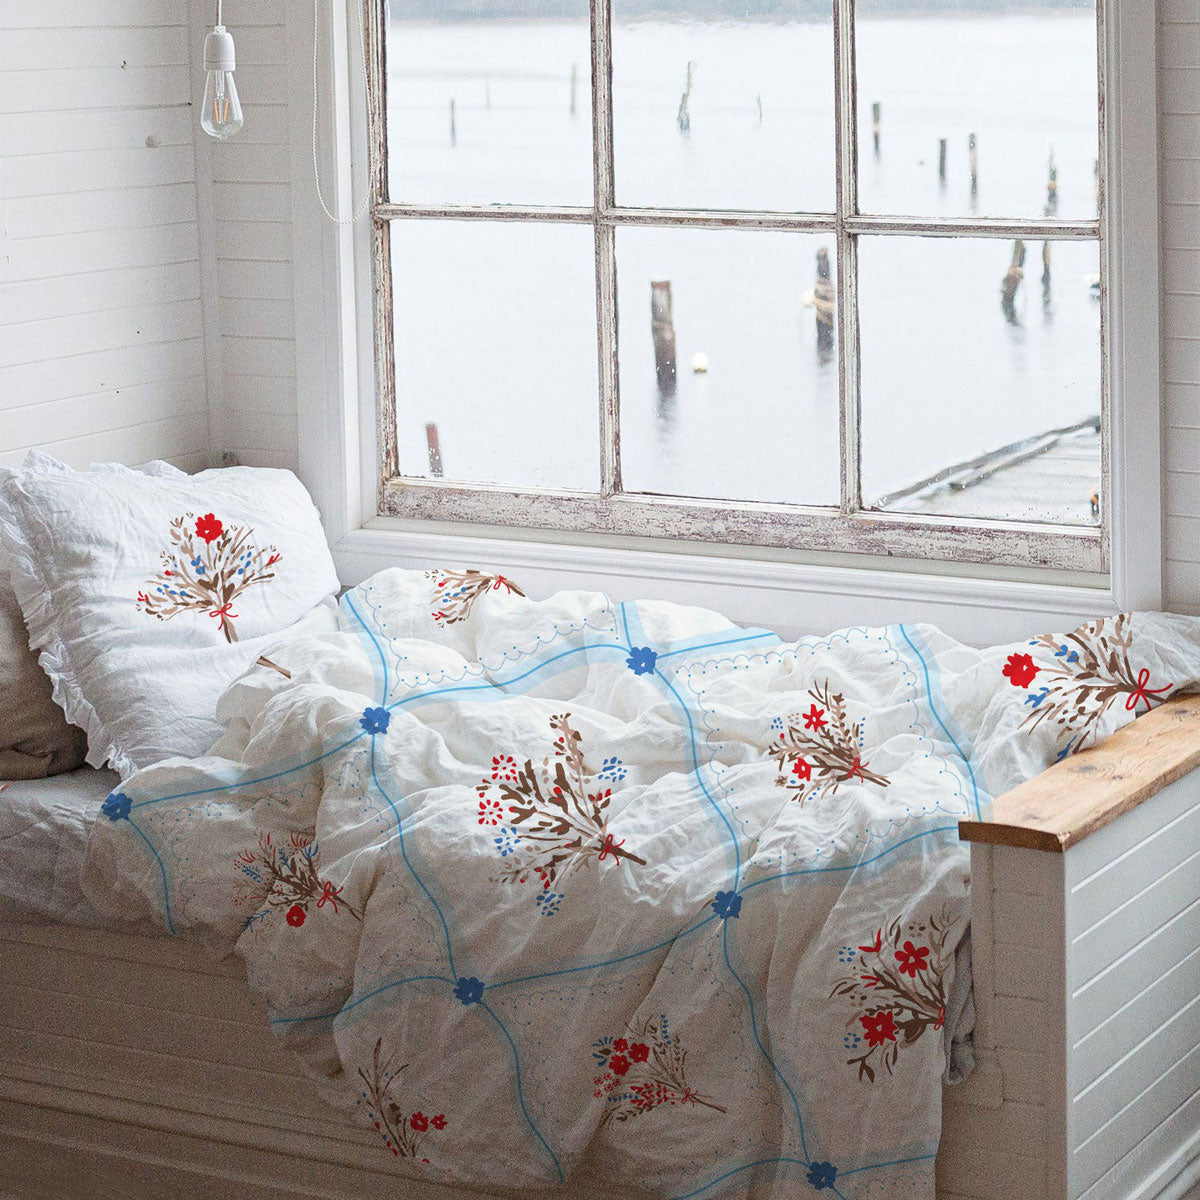 Five Patch Design bedding collection